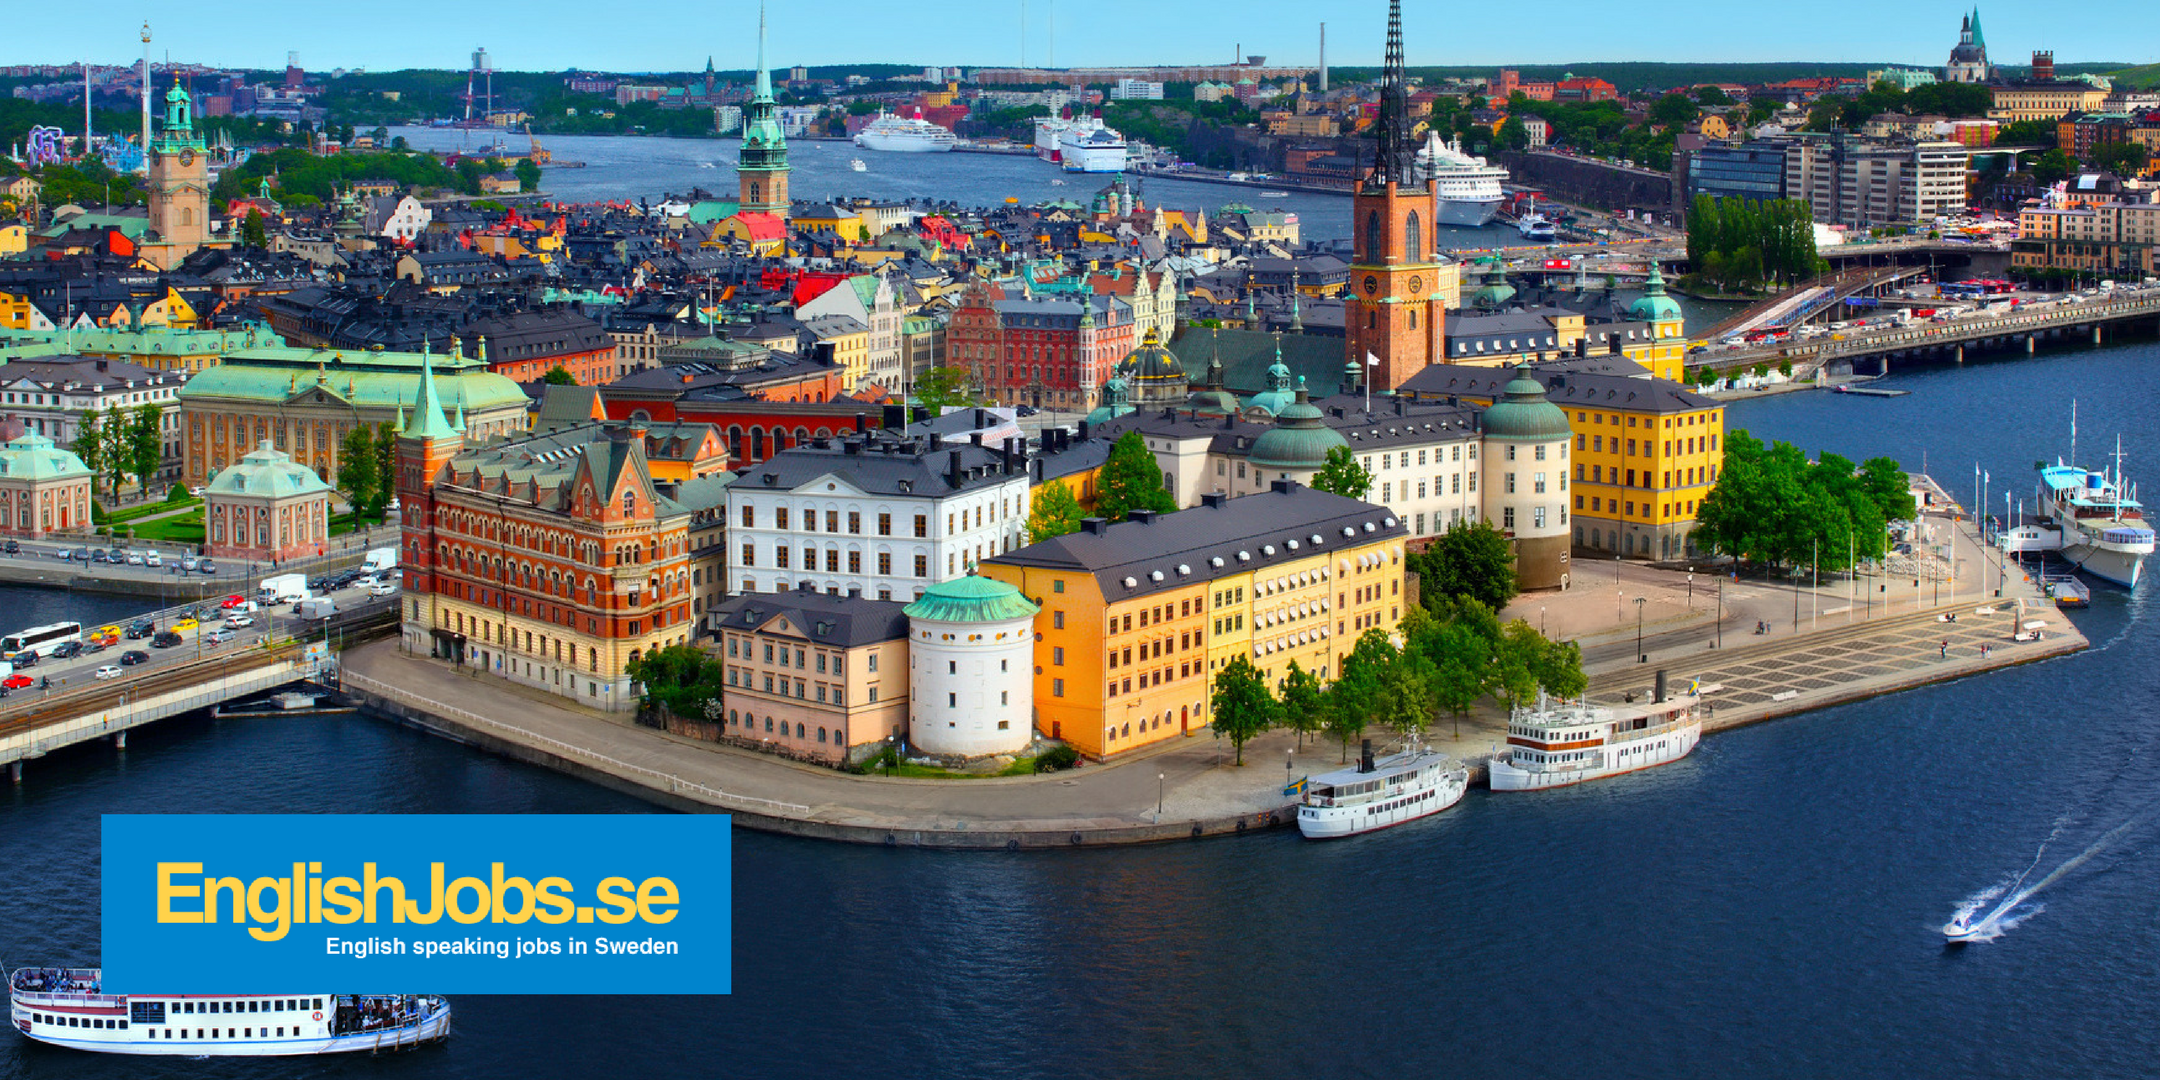 Work in Europe (Sweden, Denmark, Norway Germany) - Your CV, job search and work visa - your move from Houston to Stockholm